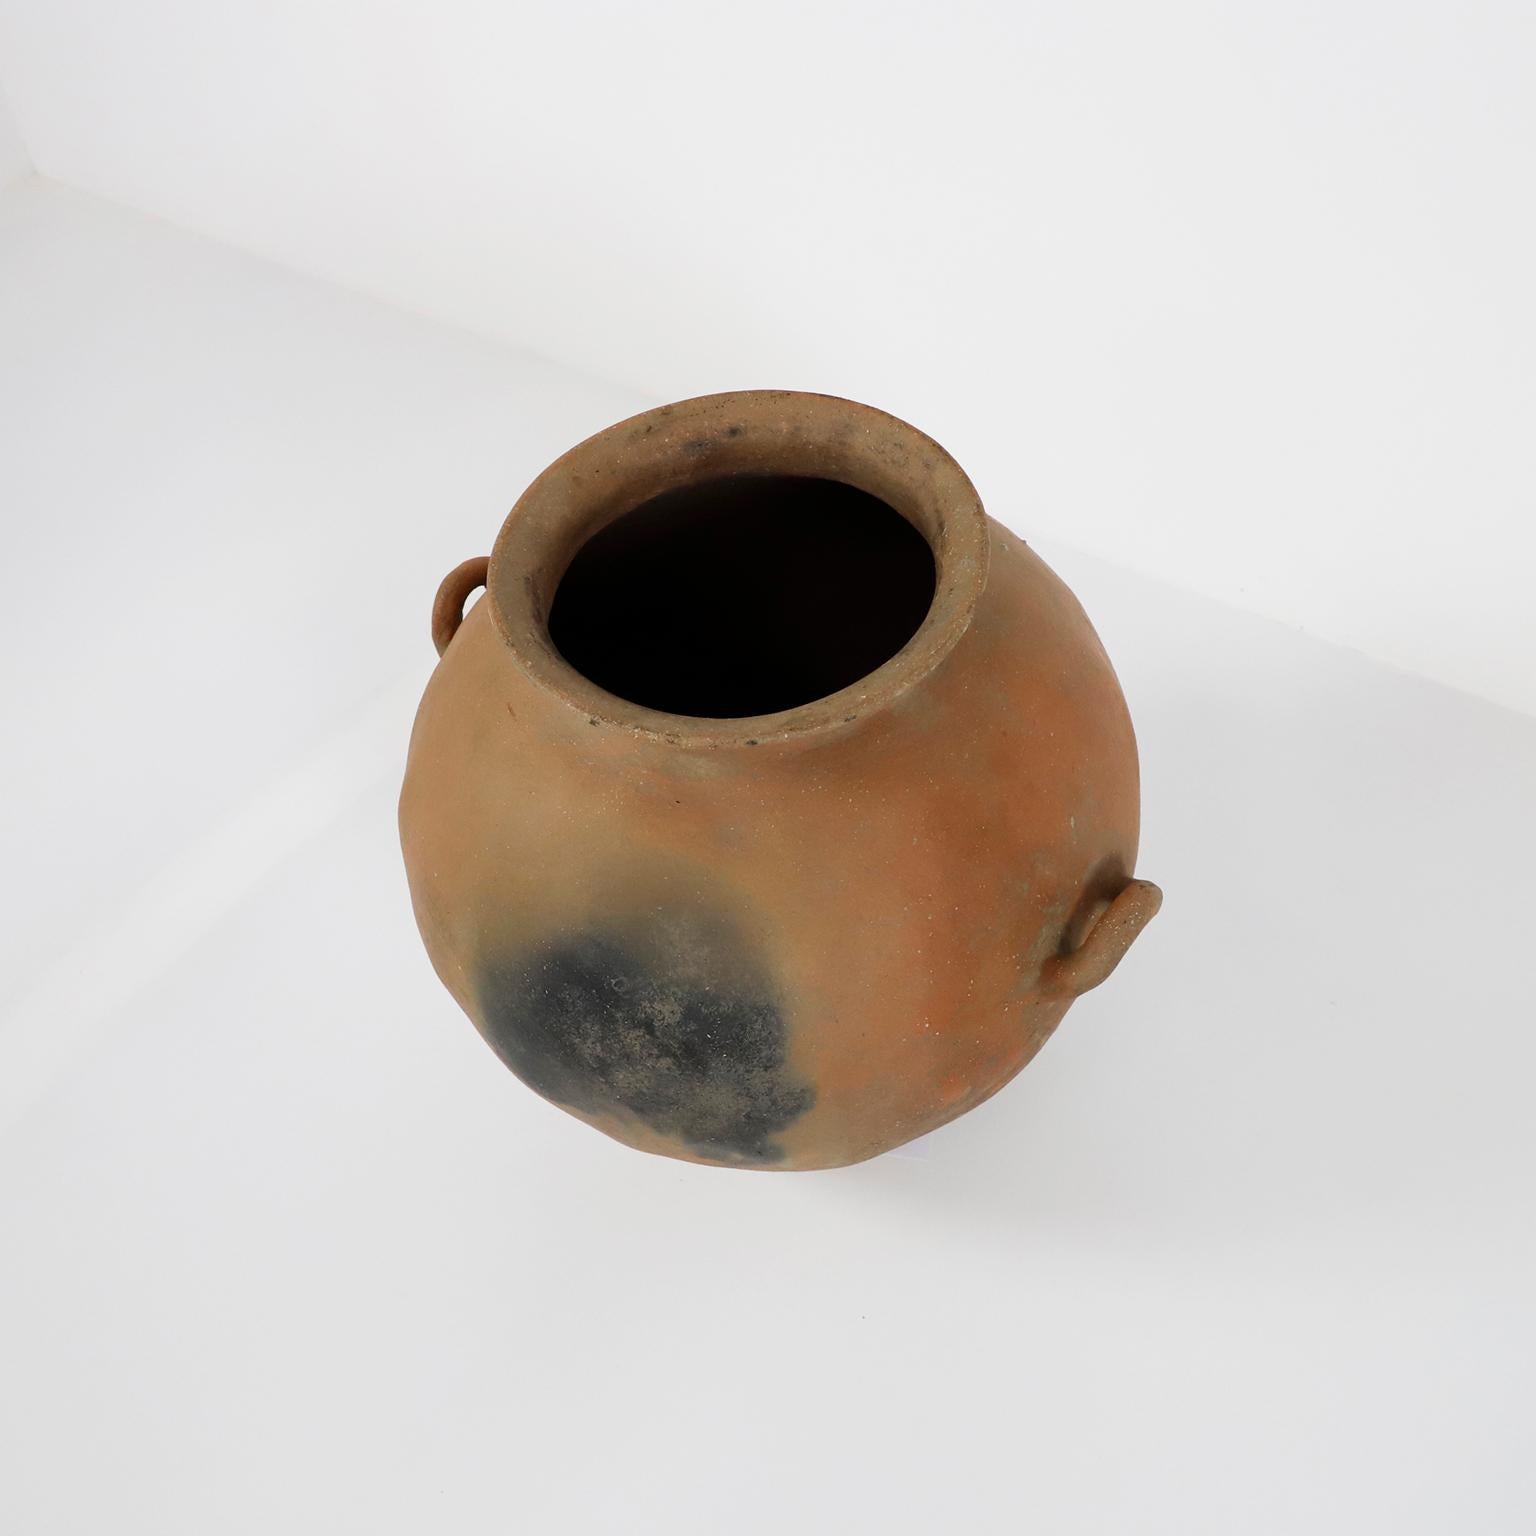 Circa 1940, we offer this fantastic ancient barro pot from Mexico, made in Puebla México hand crafted . This style of pottery is very rare, originally used for storing water from nearby rivers, the pot present some vintage details.